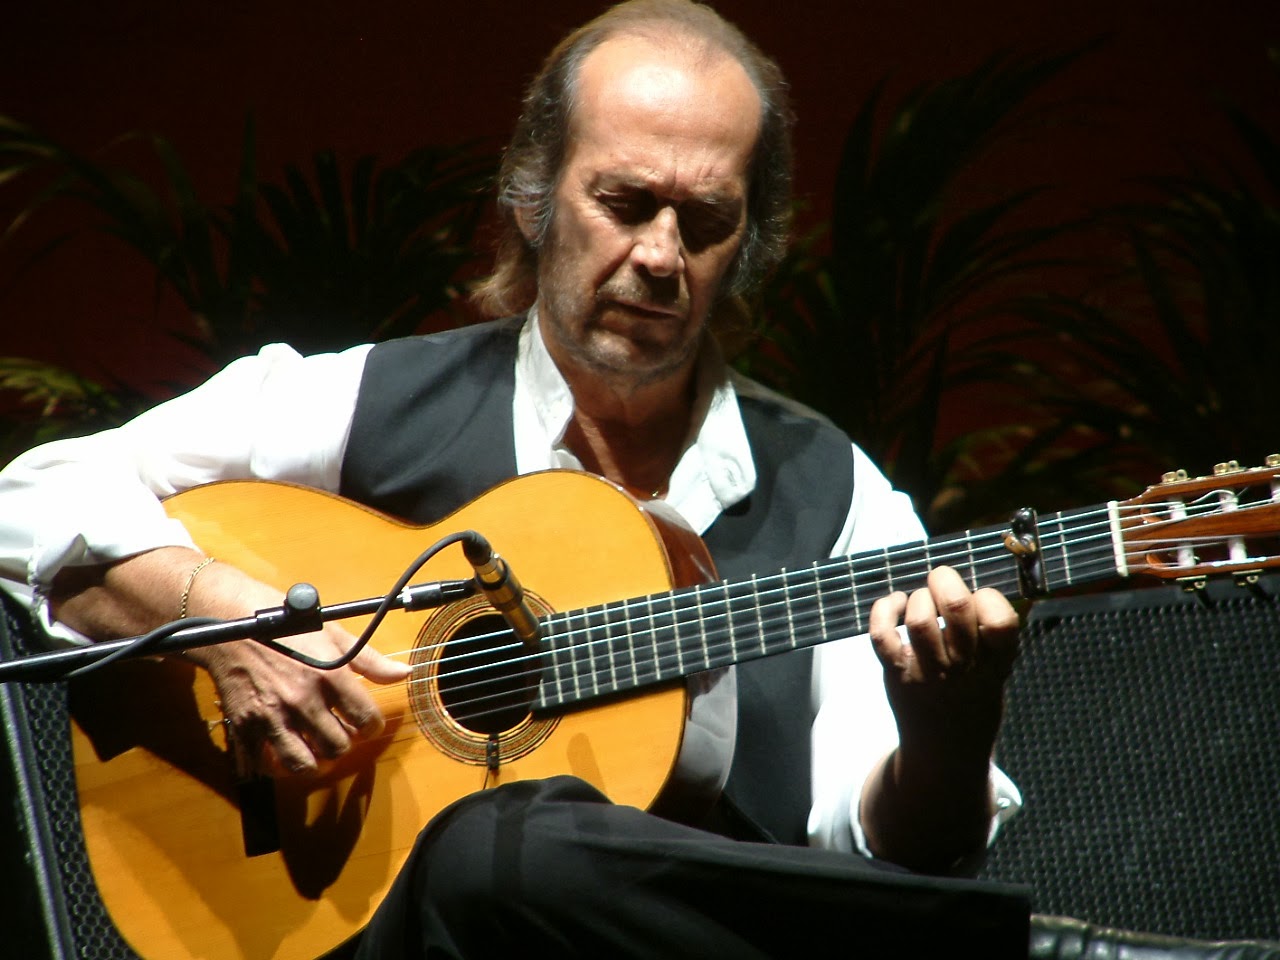 Listen to Paco de Lucia's library of music for free on Spotify